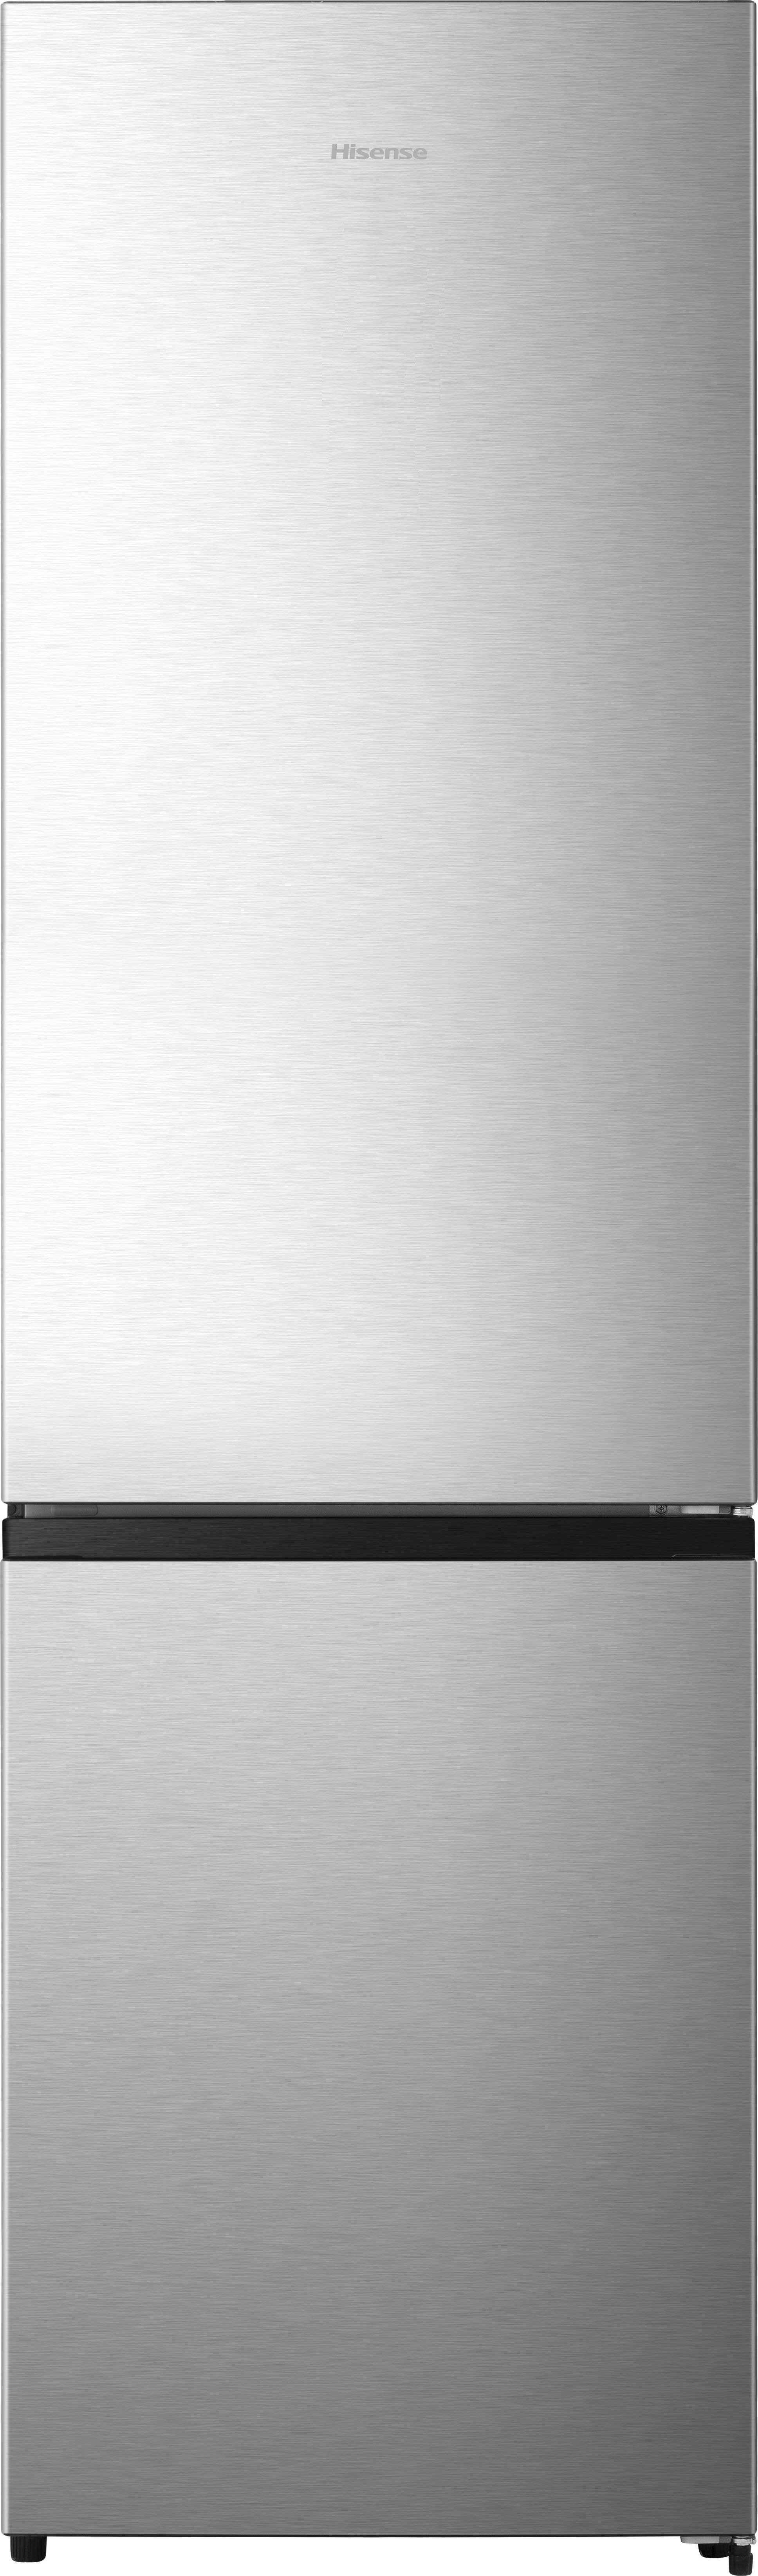 Hisense RB440N4ACA 70/30 No Frost Fridge Freezer - Stainless Steel - A Rated, Stainless Steel